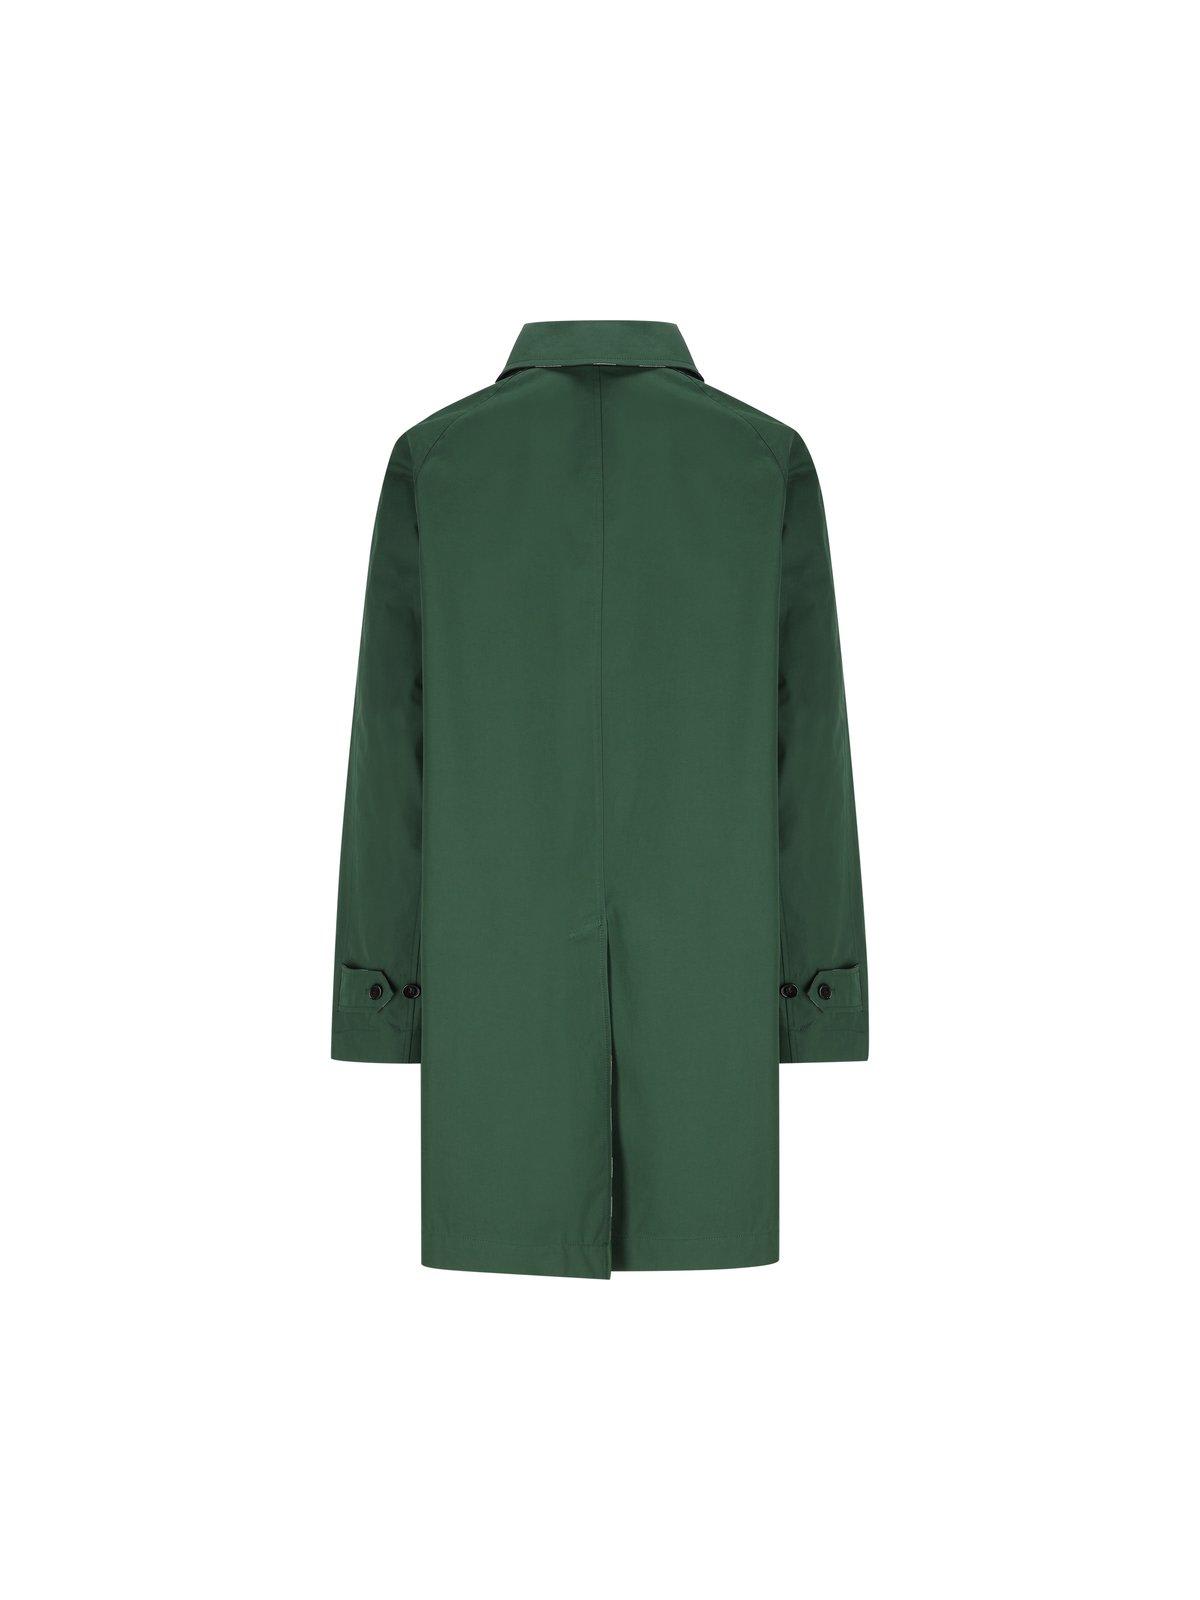 Shop Burberry Reversible Checked Buttoned Car Coat In Green/yellow